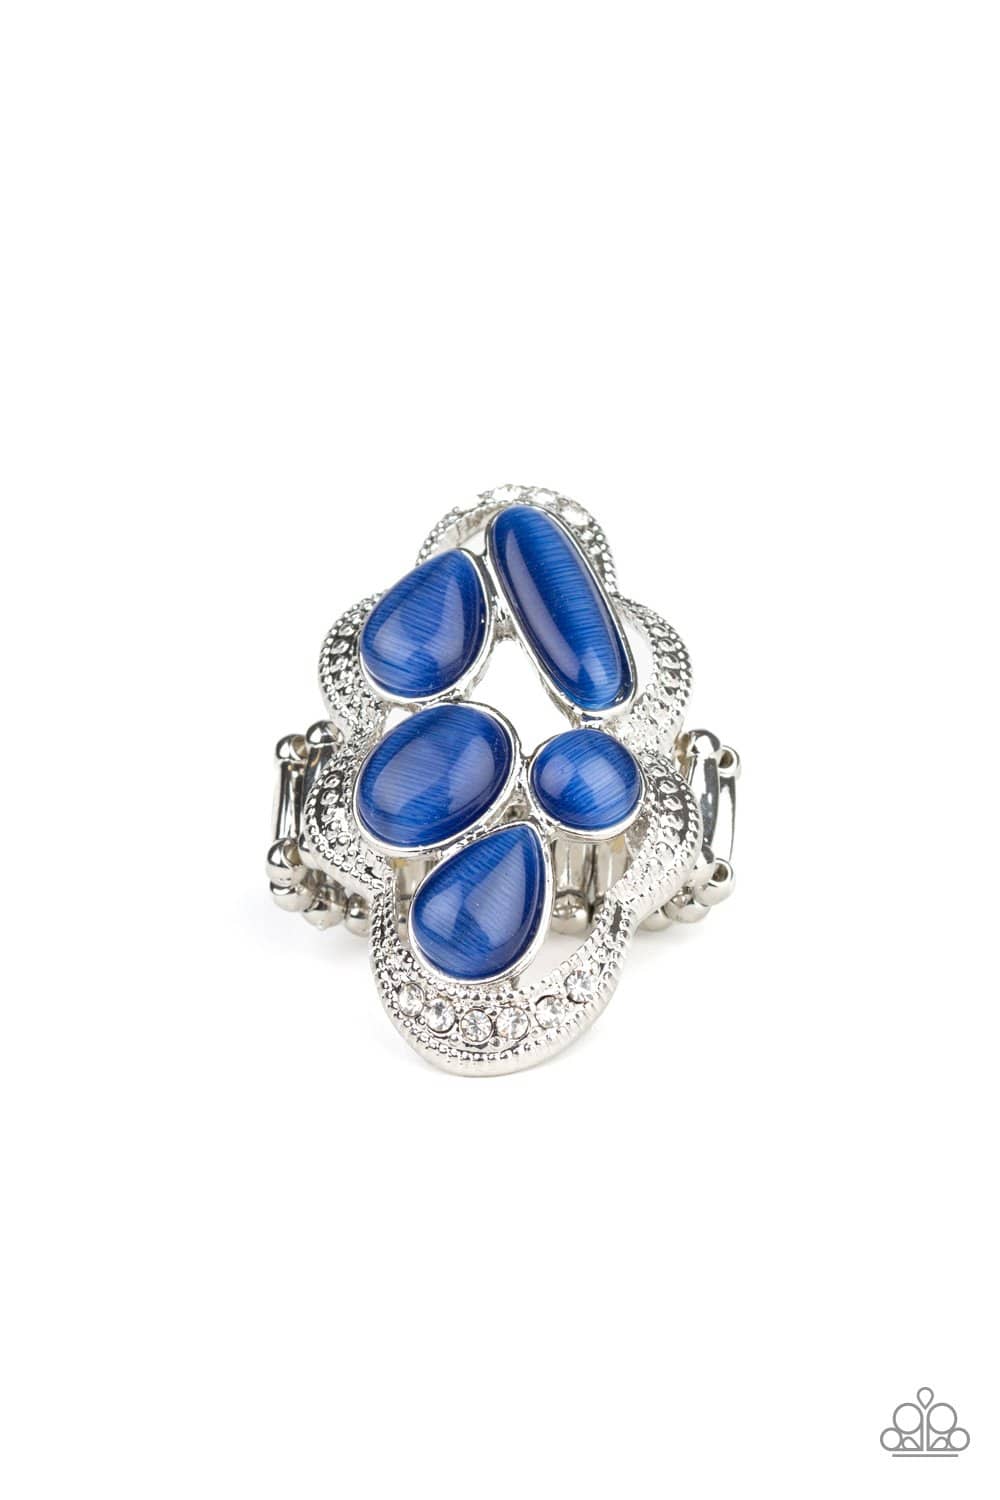 Cherished Collection - Blue Cat's Eye Ring - Paparazzi Accessories - GlaMarous Titi Jewels